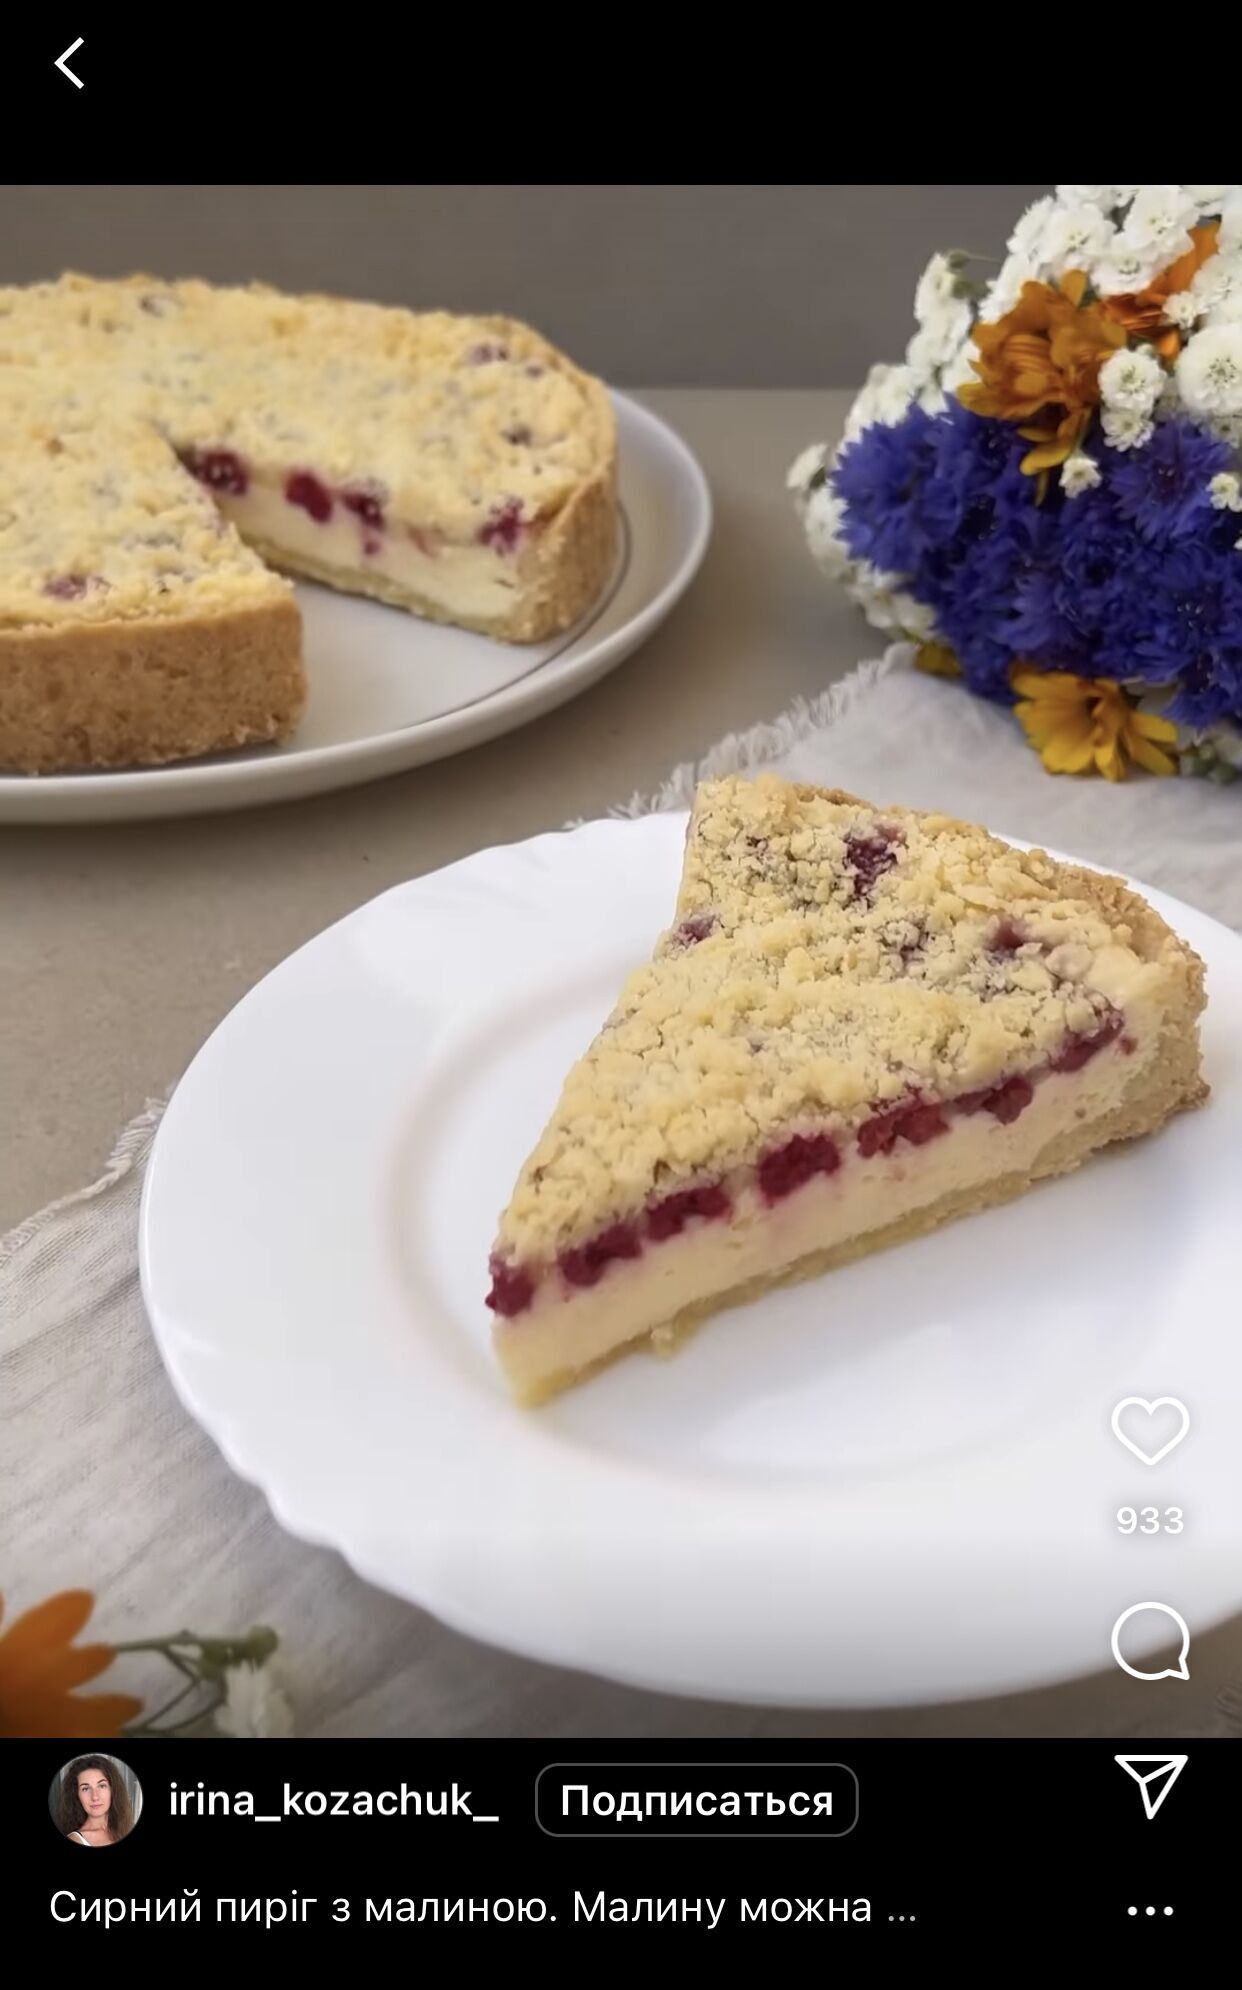 Recipe for cottage cheese pie with raspberries on shortcrust pastry